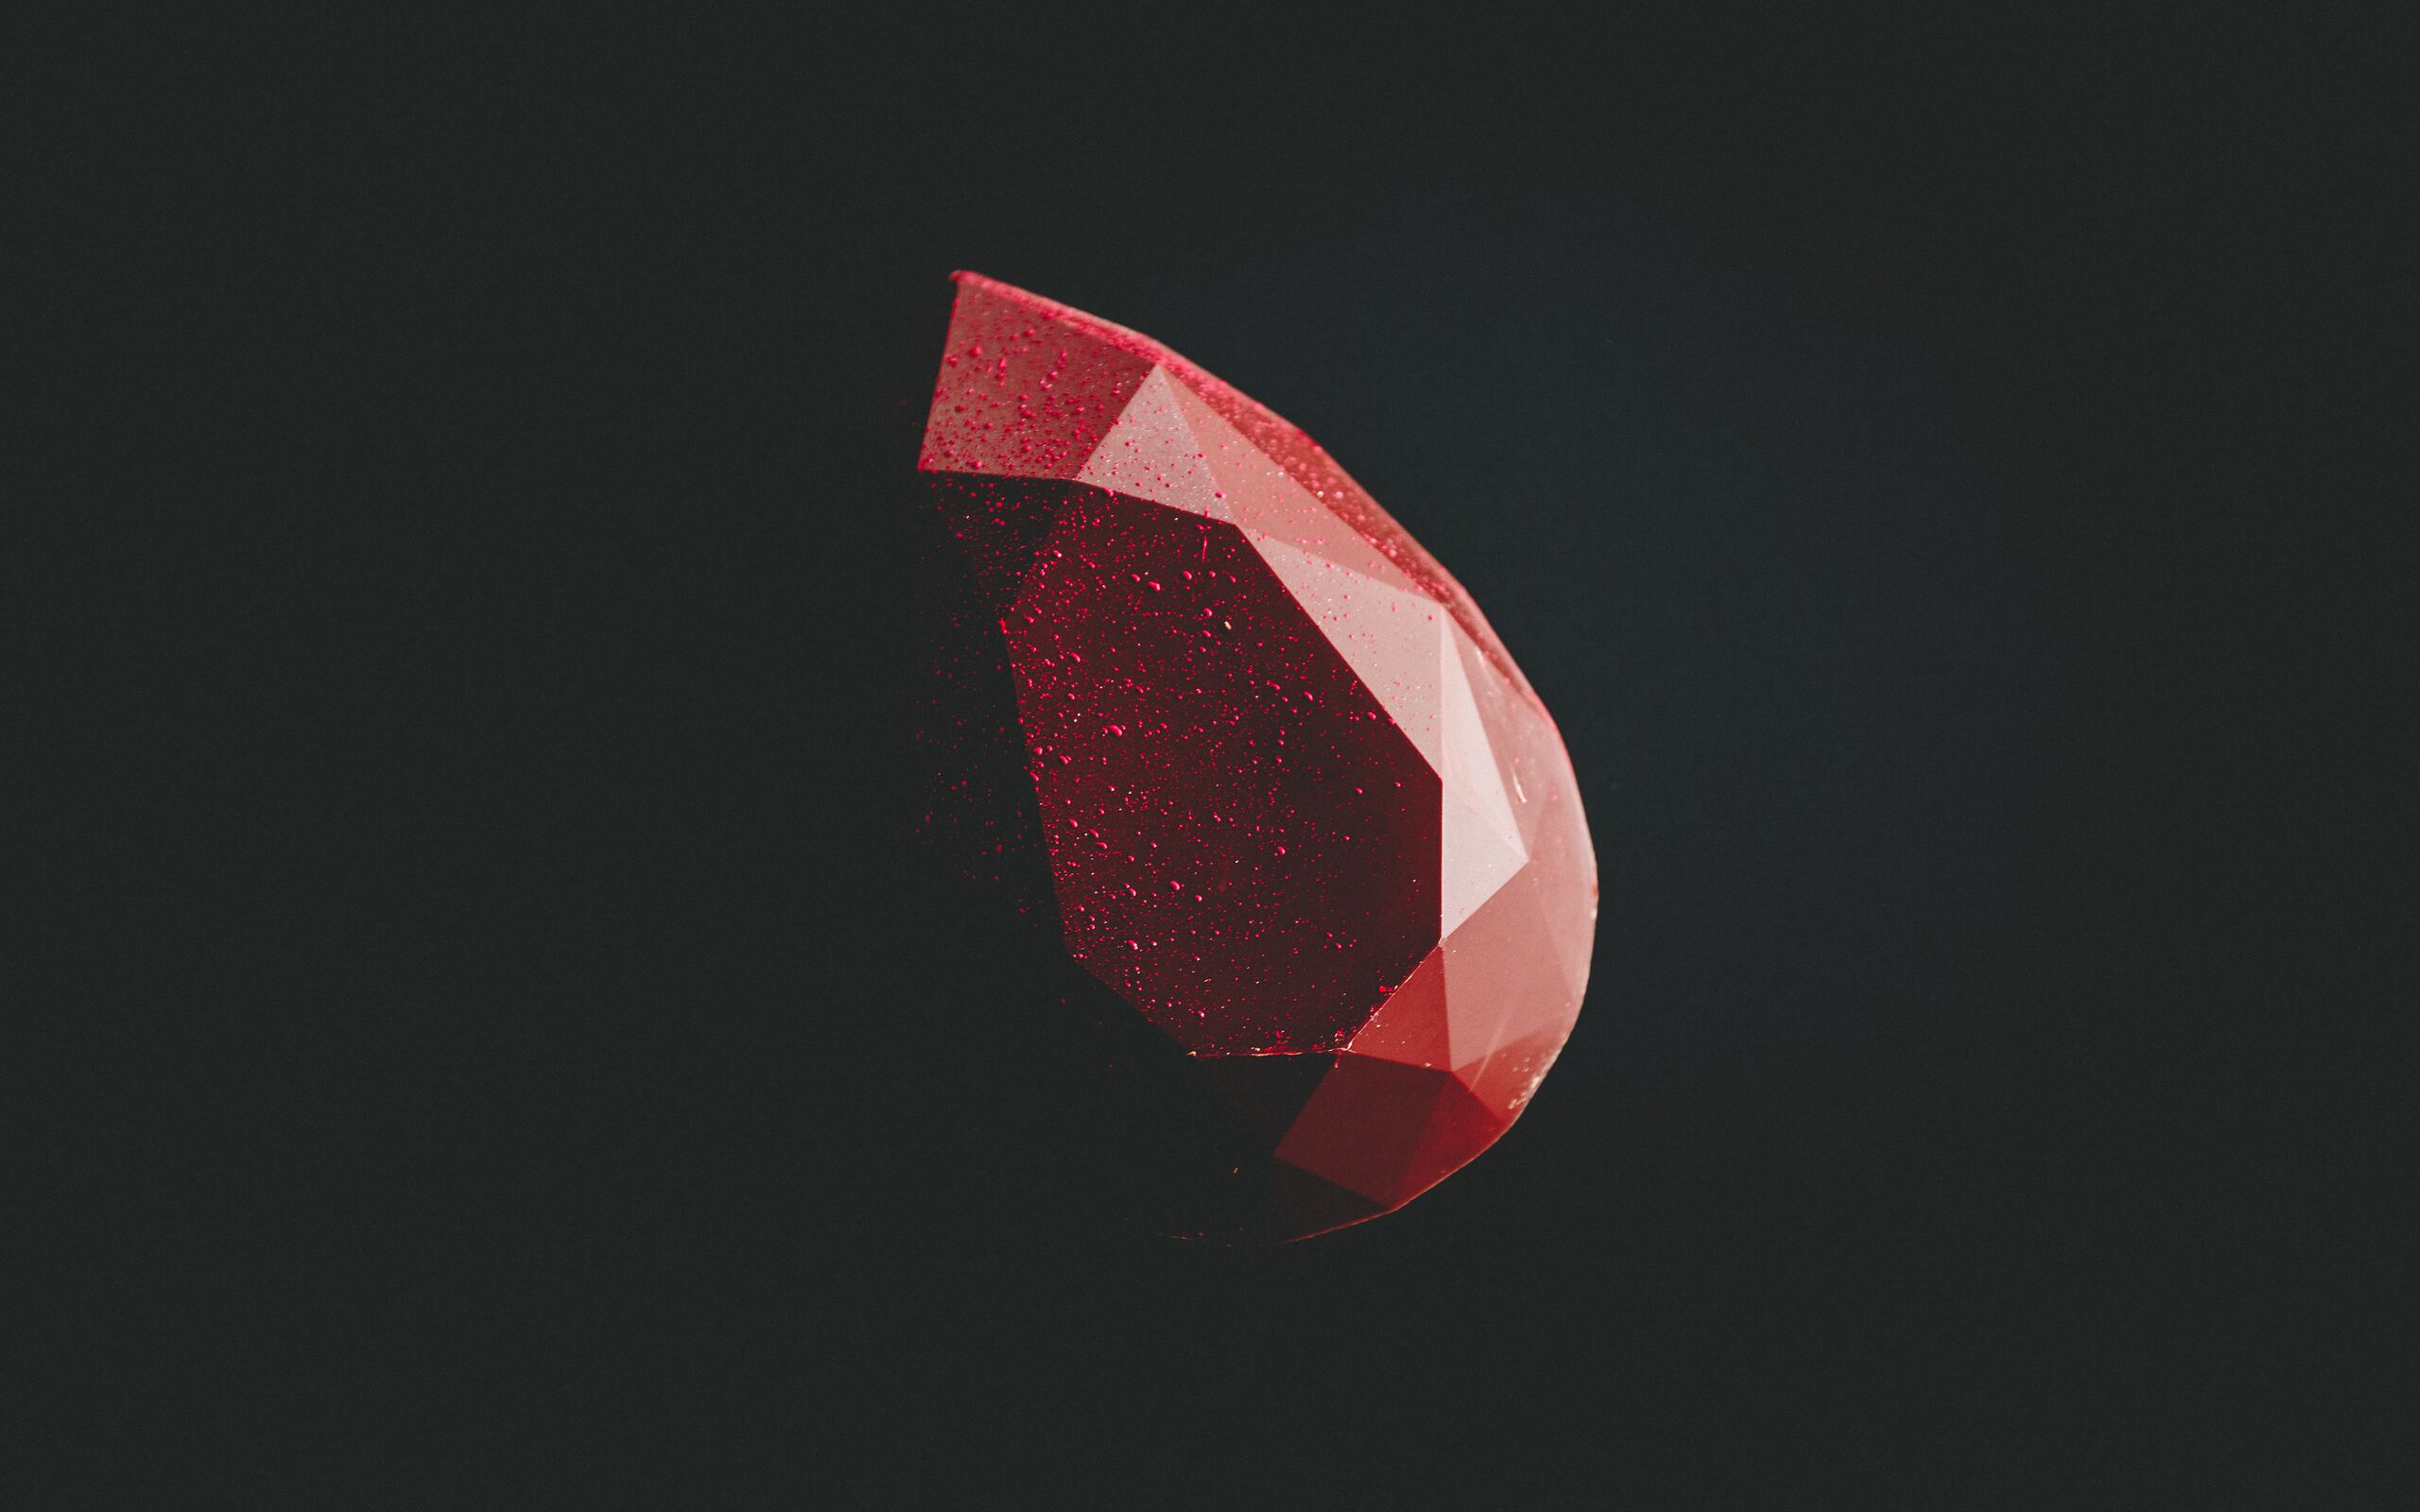 2560x1600 Red Diamond Minimal Dark 5k 2560x1600 Resolution Hd 4k Wallpapers Images Backgrounds Photos And Pictures